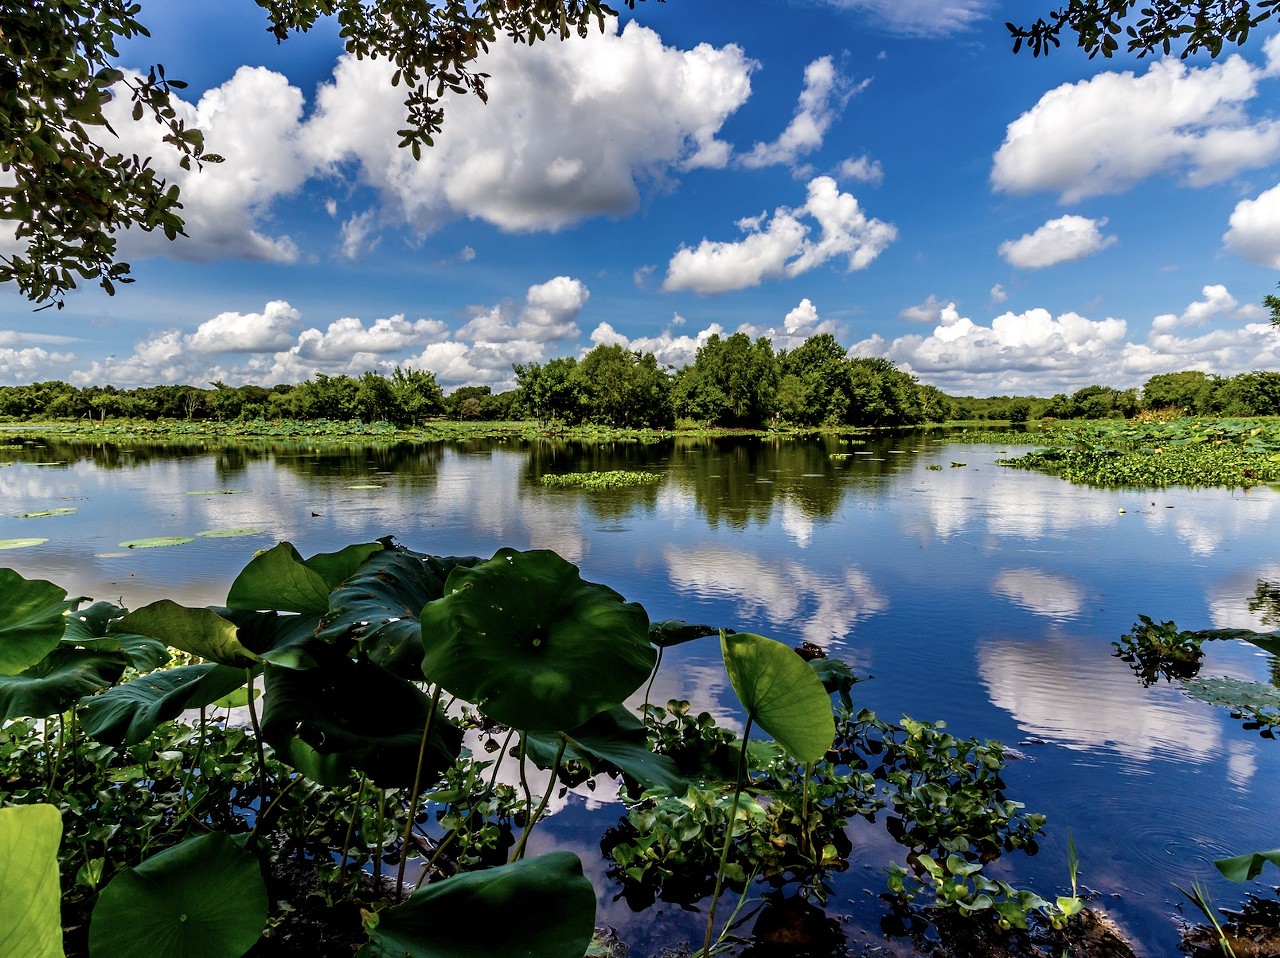 Brazos Bend State Park
21901 FM 762 Road, Needville, (979) 553-5101, tpwd.texas.gov
South of Houston is Brazos Bend, which prides itself in offering a “wild” experience. A pair of binoculars and a camera are a must for those wanting to enjoy the park's abundant wildlife and beautiful landscapes. Visitors are also welcome to hike, bike, fish and ride horses. With the “wild” experience in mind, make sure to read their alligator safety tips before heading out to explore.